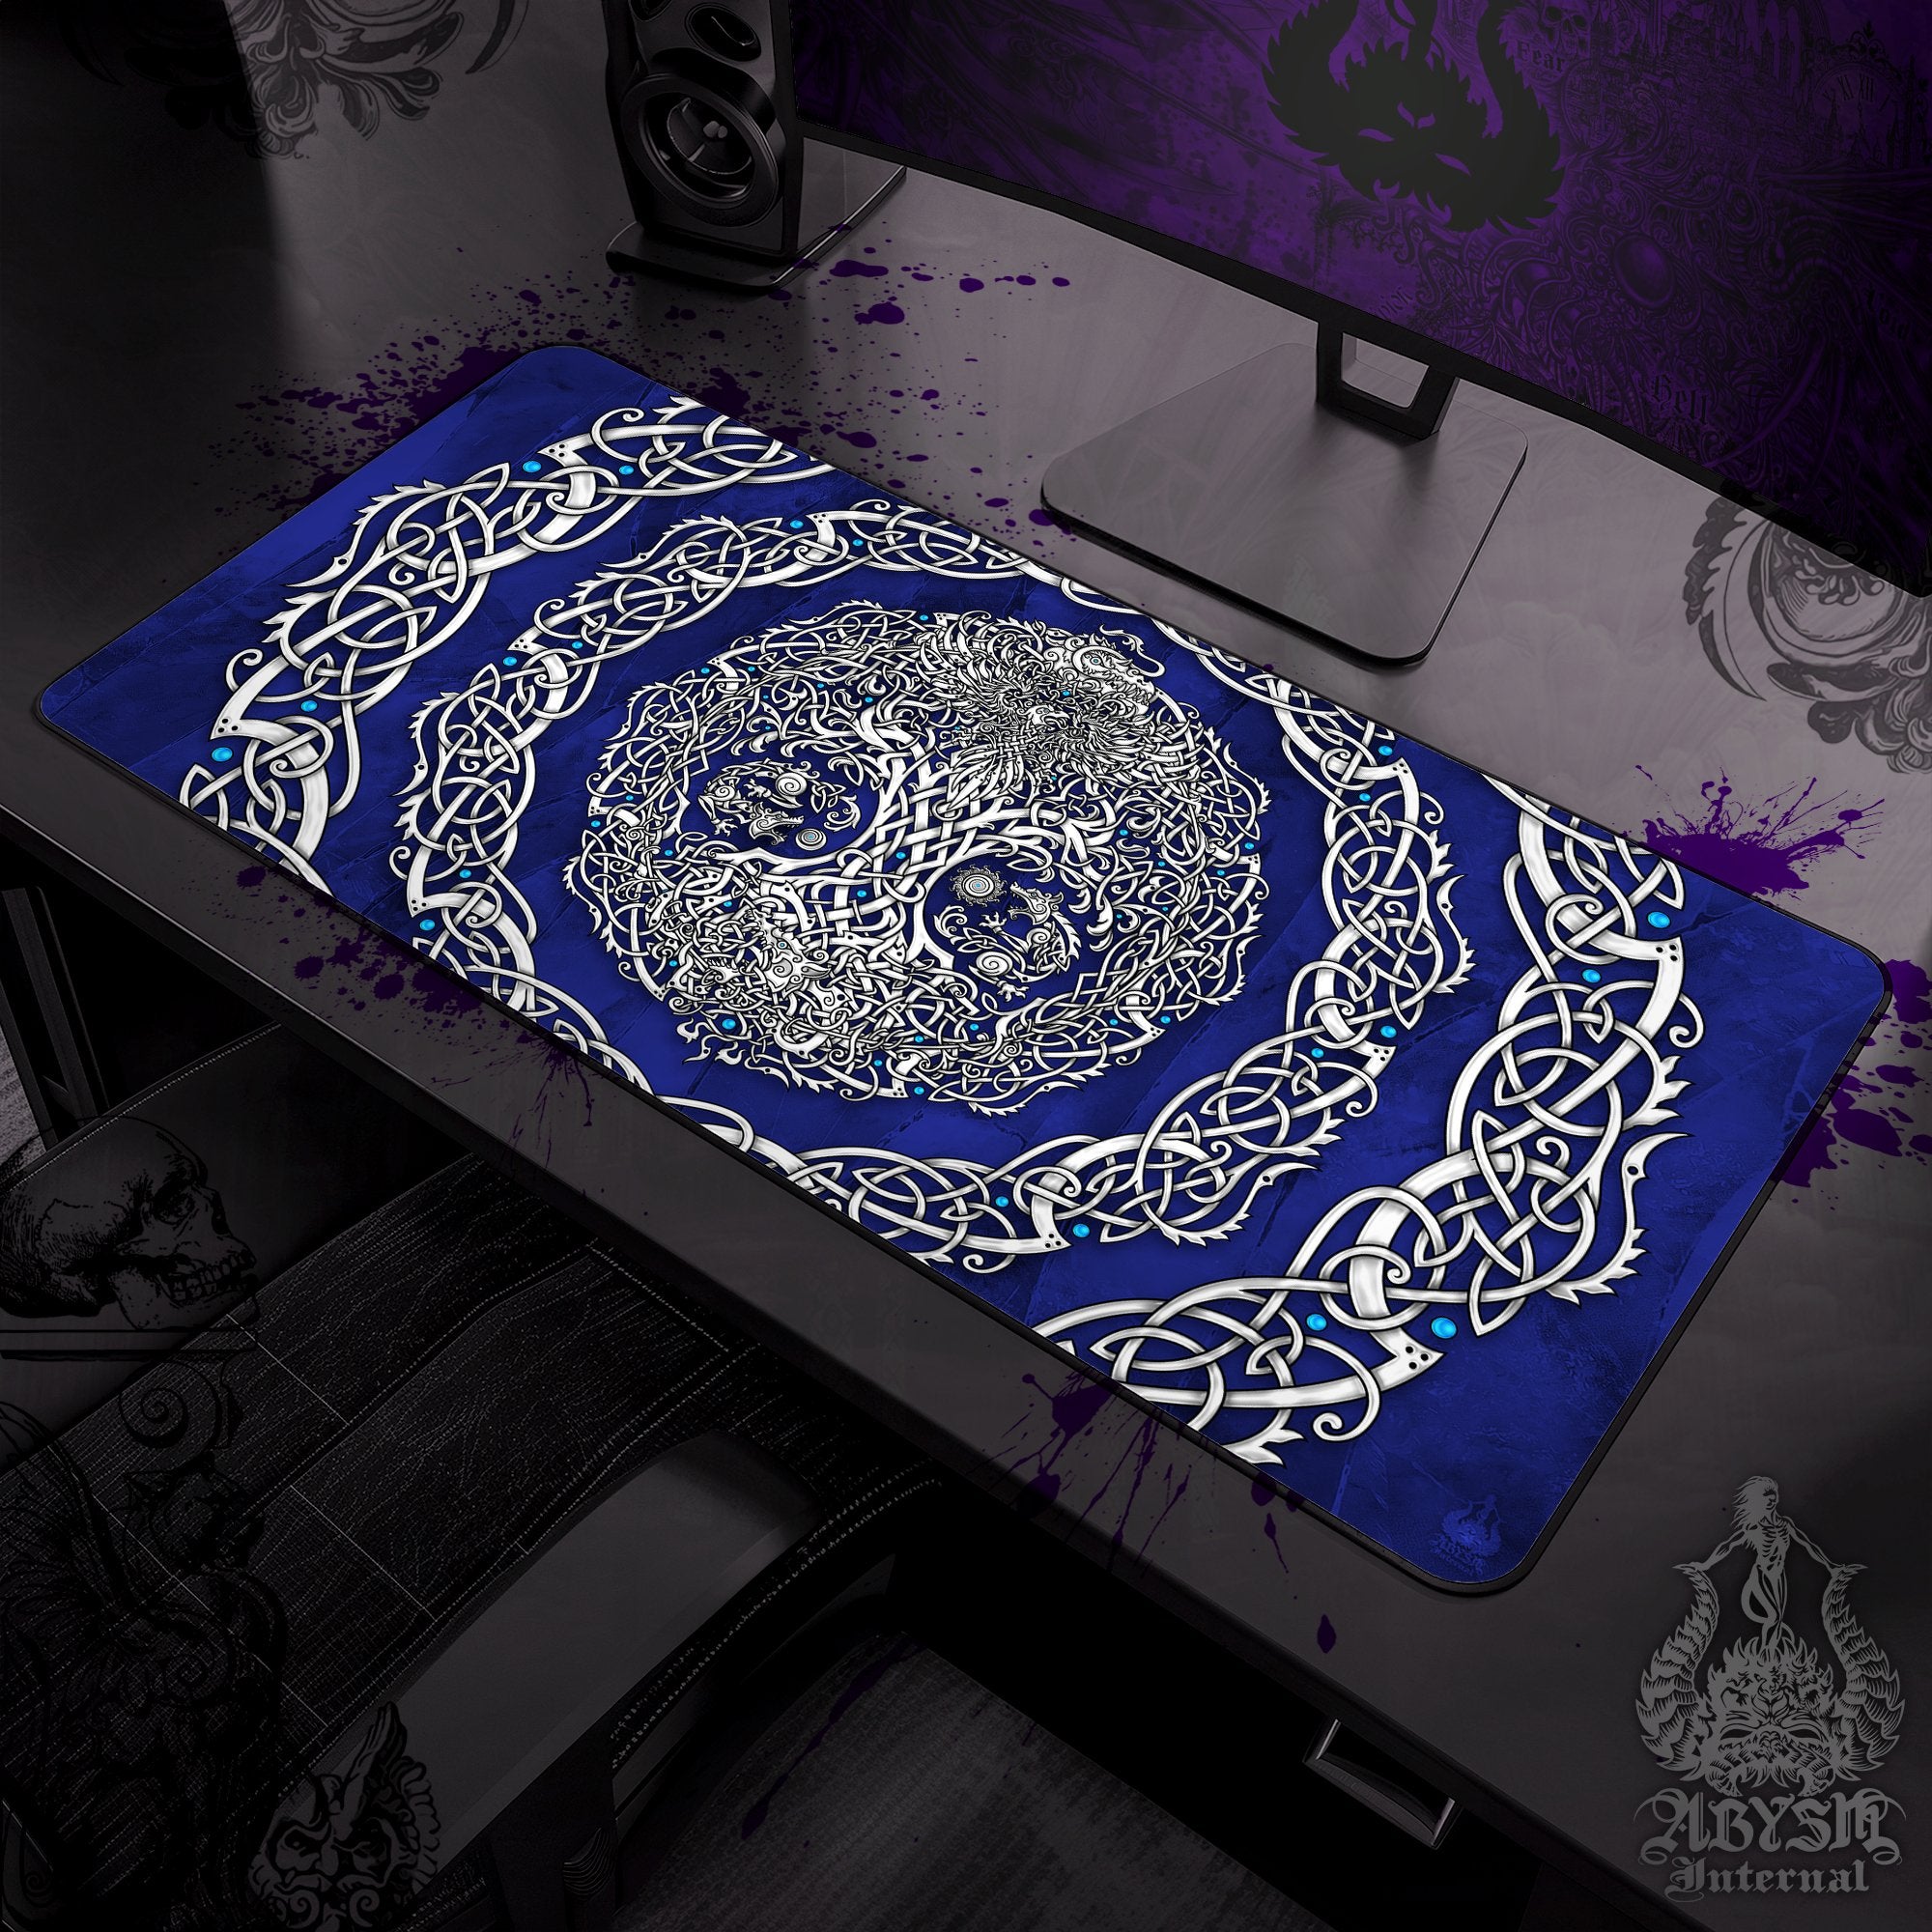 Yggdrasil Mouse Pad, Viking Gaming Desk Mat, Norse Tree of Life Workpad, Knotwork Table Protector Cover, Nordic Art Print - 3 Colors - Abysm Internal